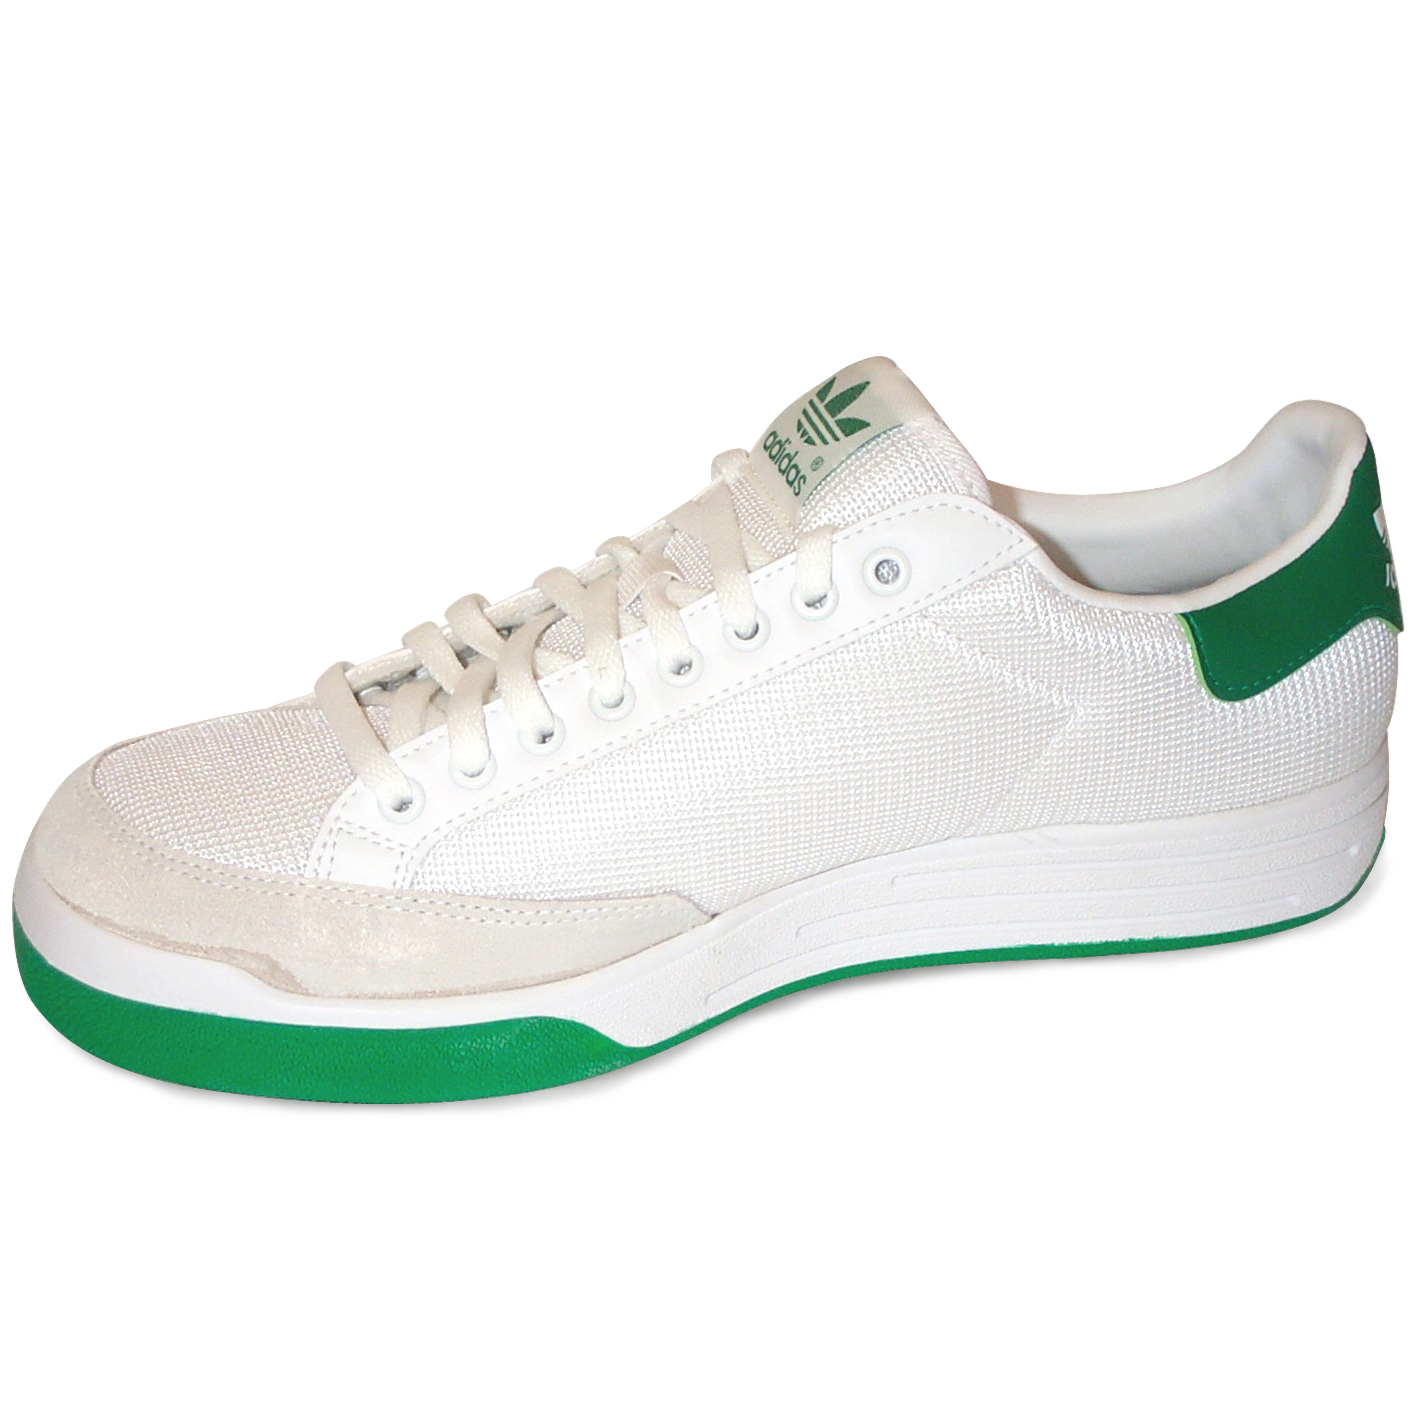 rod laver adidas for sale